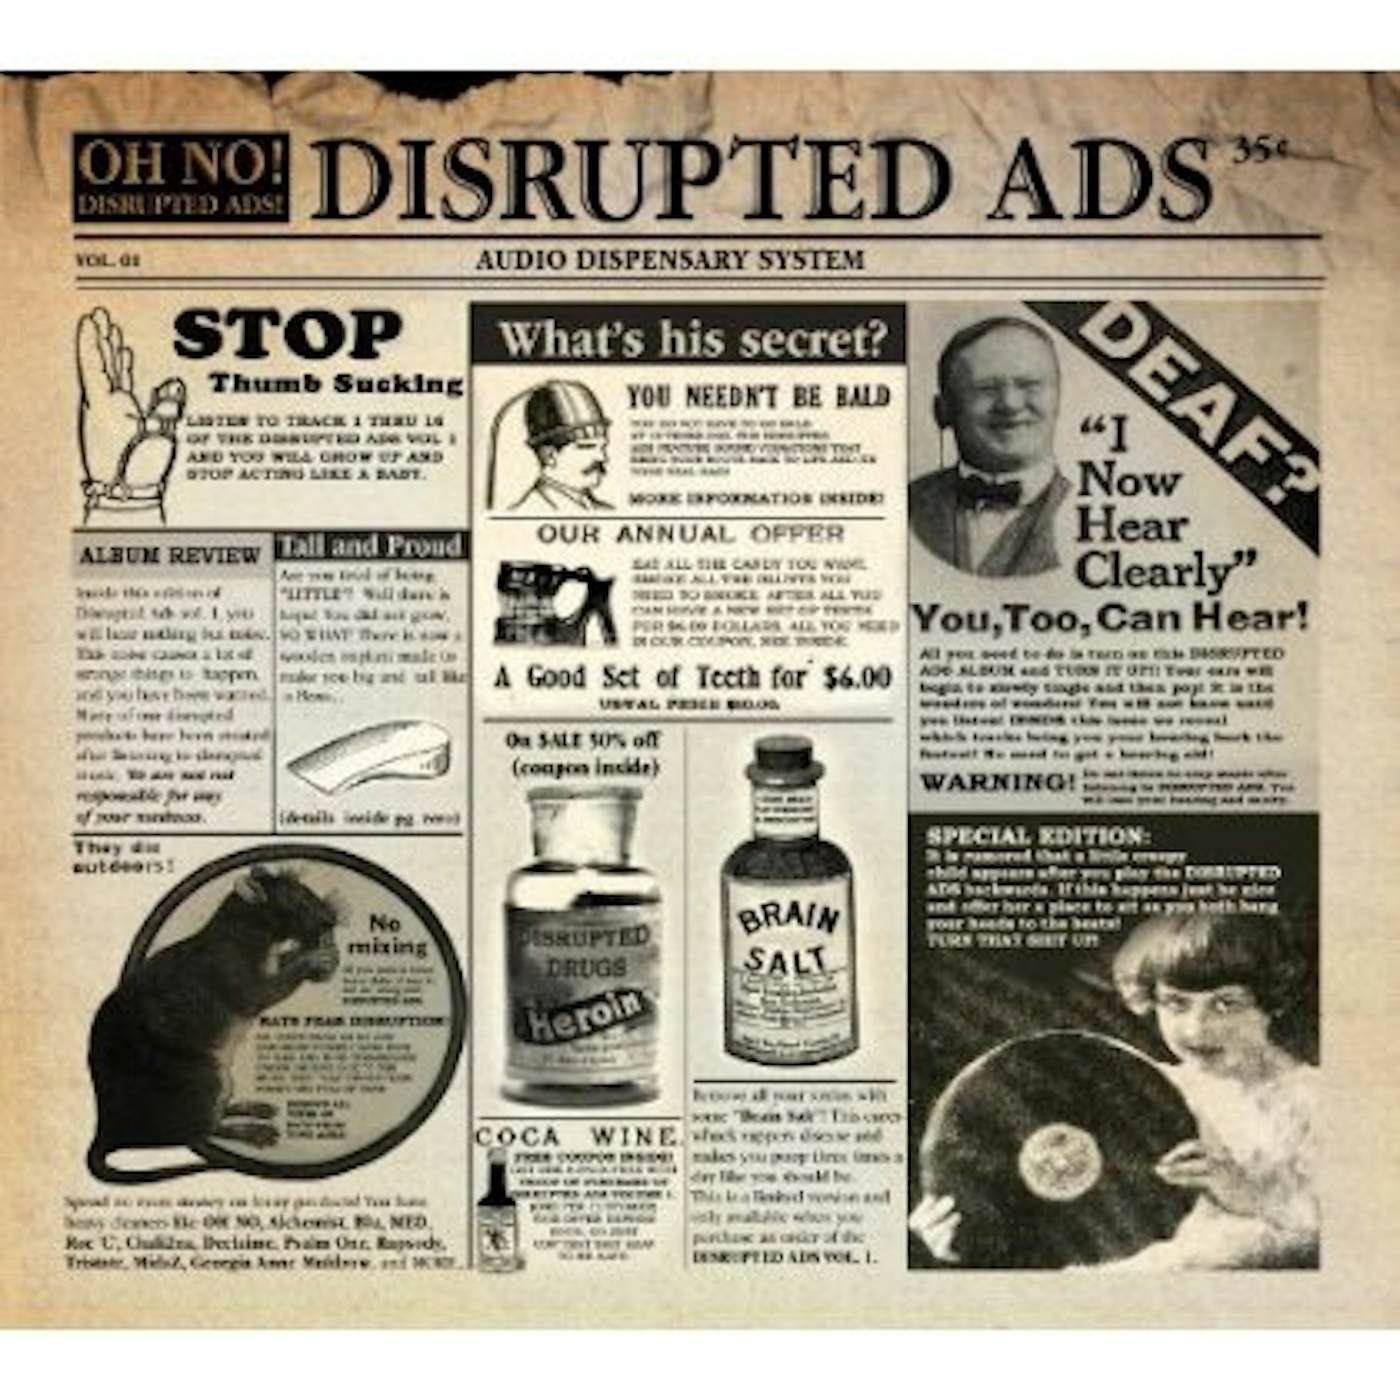 Oh No DISRUPTED ADS CD